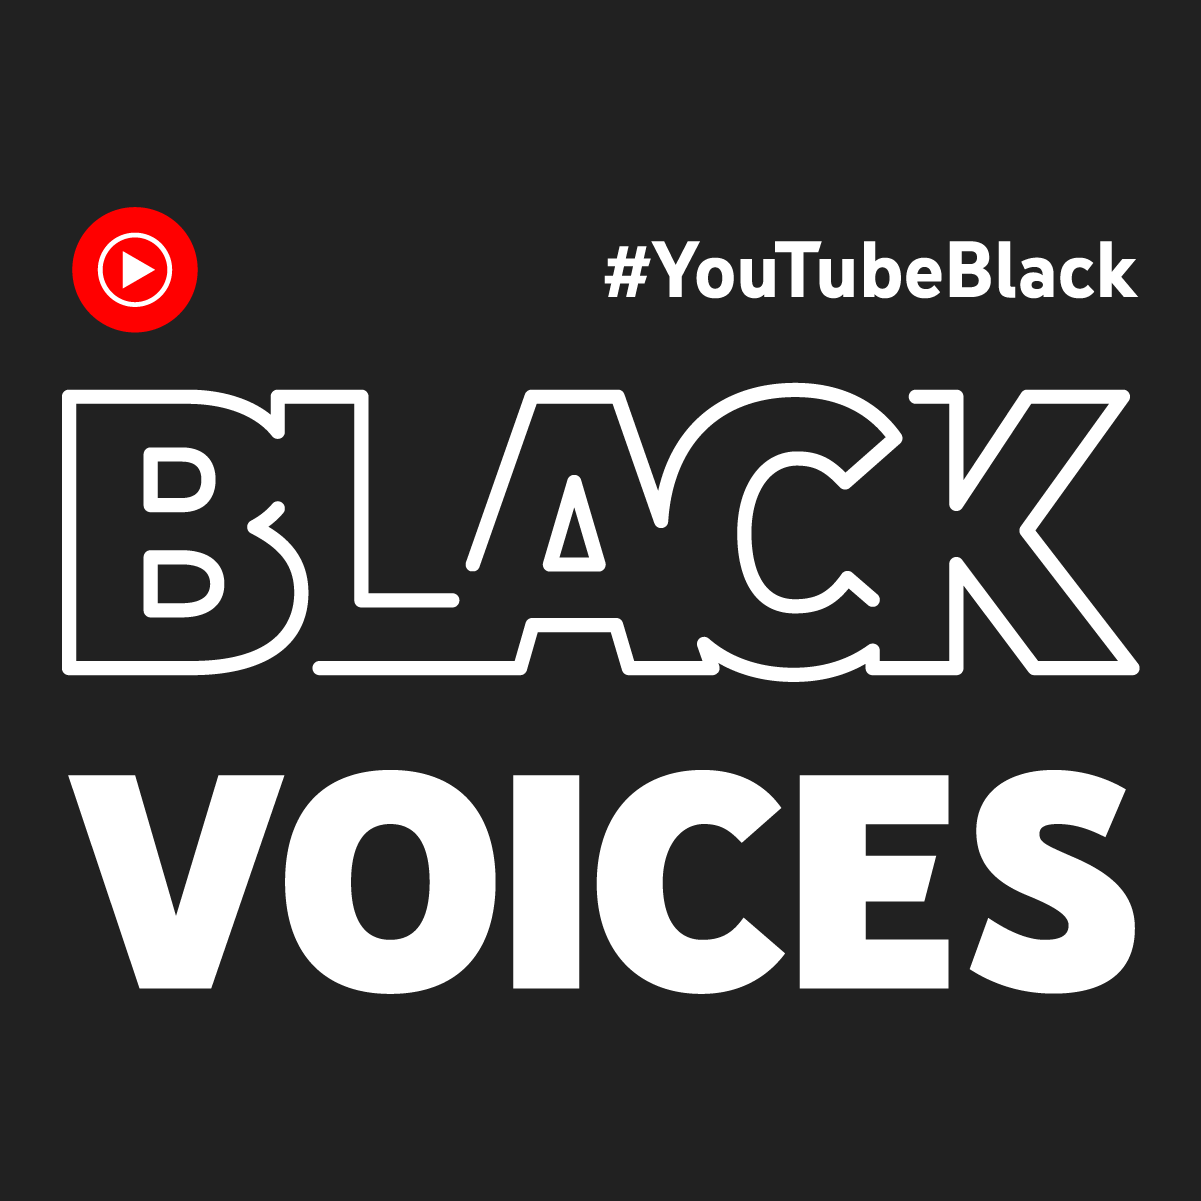 YouTube Music Expands Commitment To Black Music Through #YouTubeBlack Voices Fund